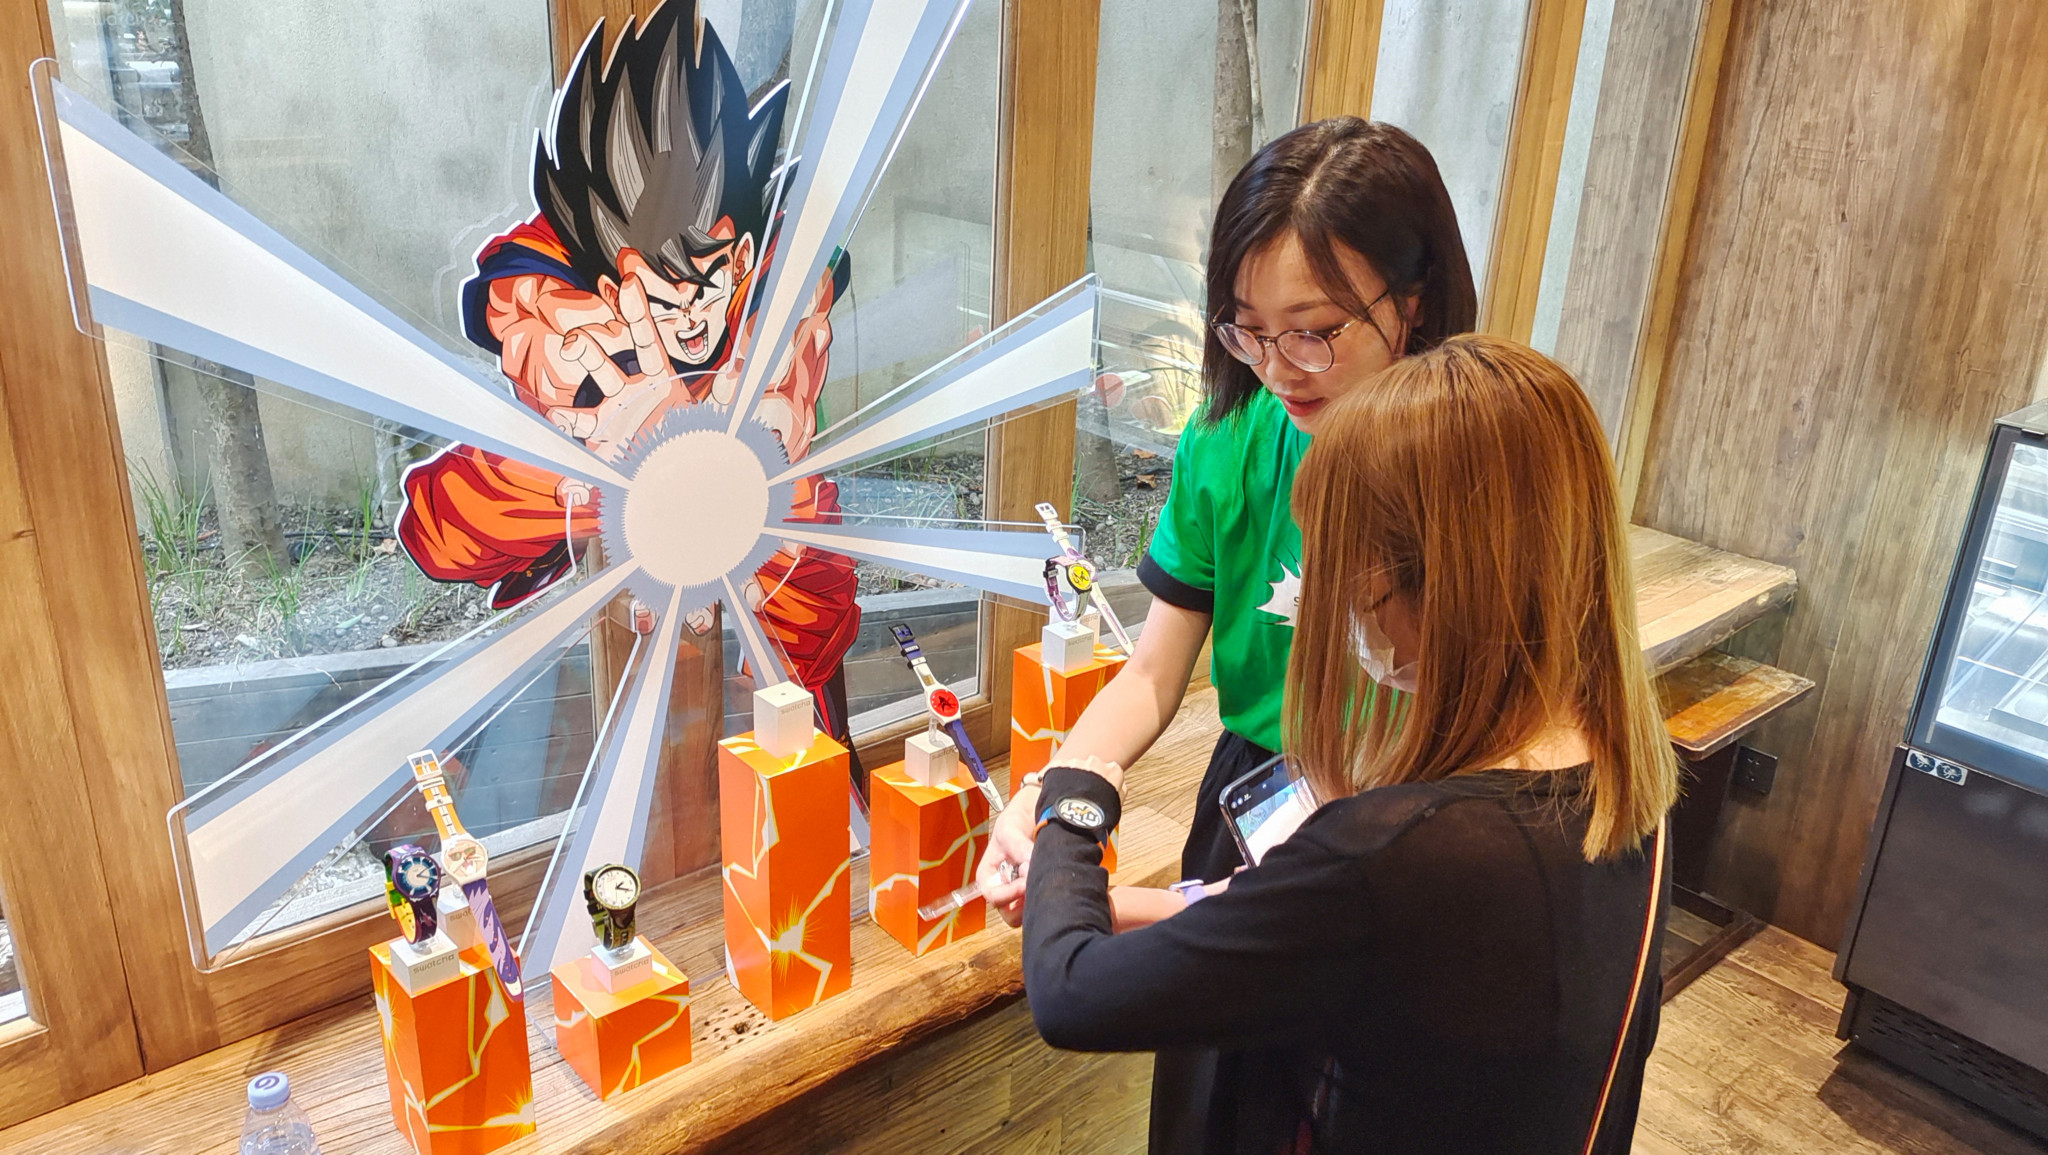 SHANGHAI, CHINA - AUGUST 30, 2022 - The SWATCH X DRAGON BALL Z series co-branded watch products are displayed in Shanghai, China, on Aug 30, 2022. Switzerland's SWATCH, the world's leading watch brand, held a new product appreciation event and launched its first joint watch series, SWATCH X DRAGON BALL Z, jointly with Japanese animation DRAGON BALL Z. (Photo credit should read CFOTO/Future Publishing via Getty Images)